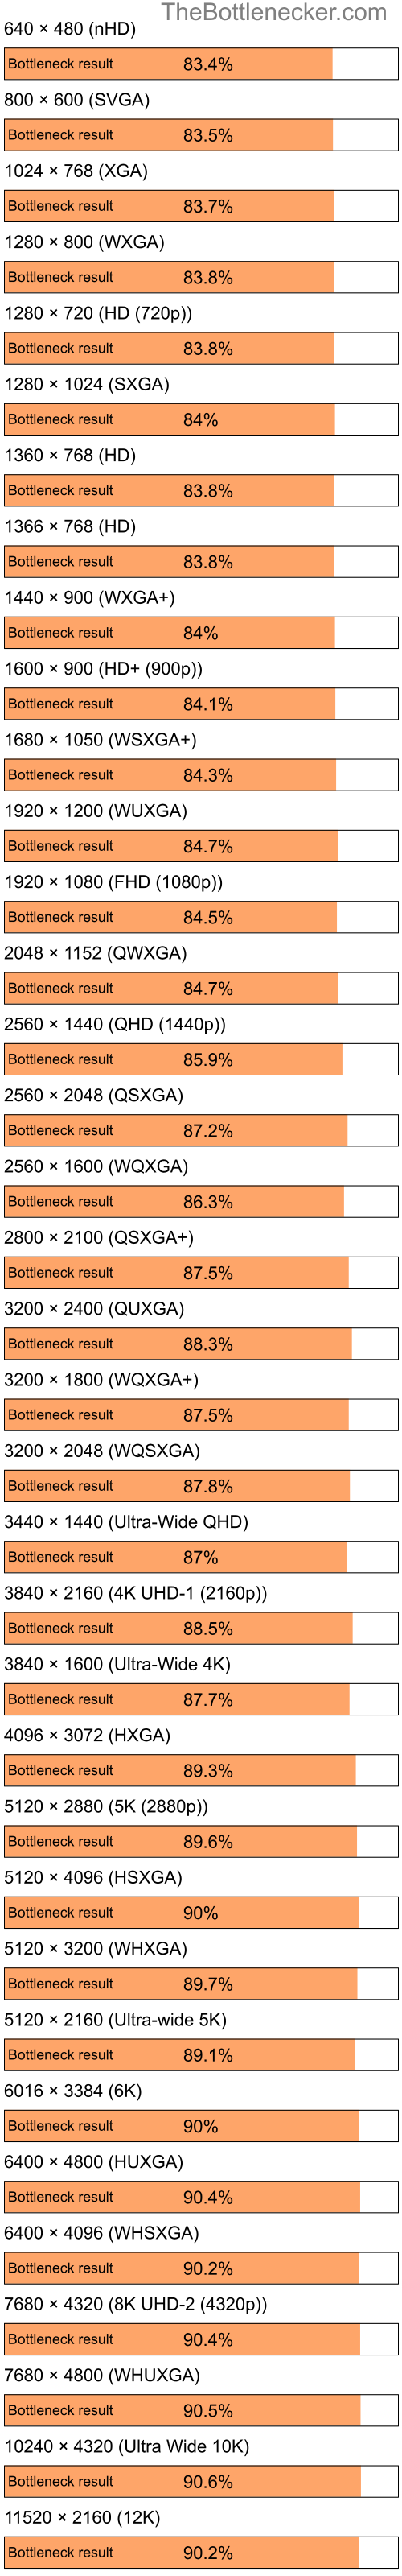 Bottleneck results by resolution for Intel Pentium 4 and NVIDIA nForce 610i in Graphic Card Intense Tasks